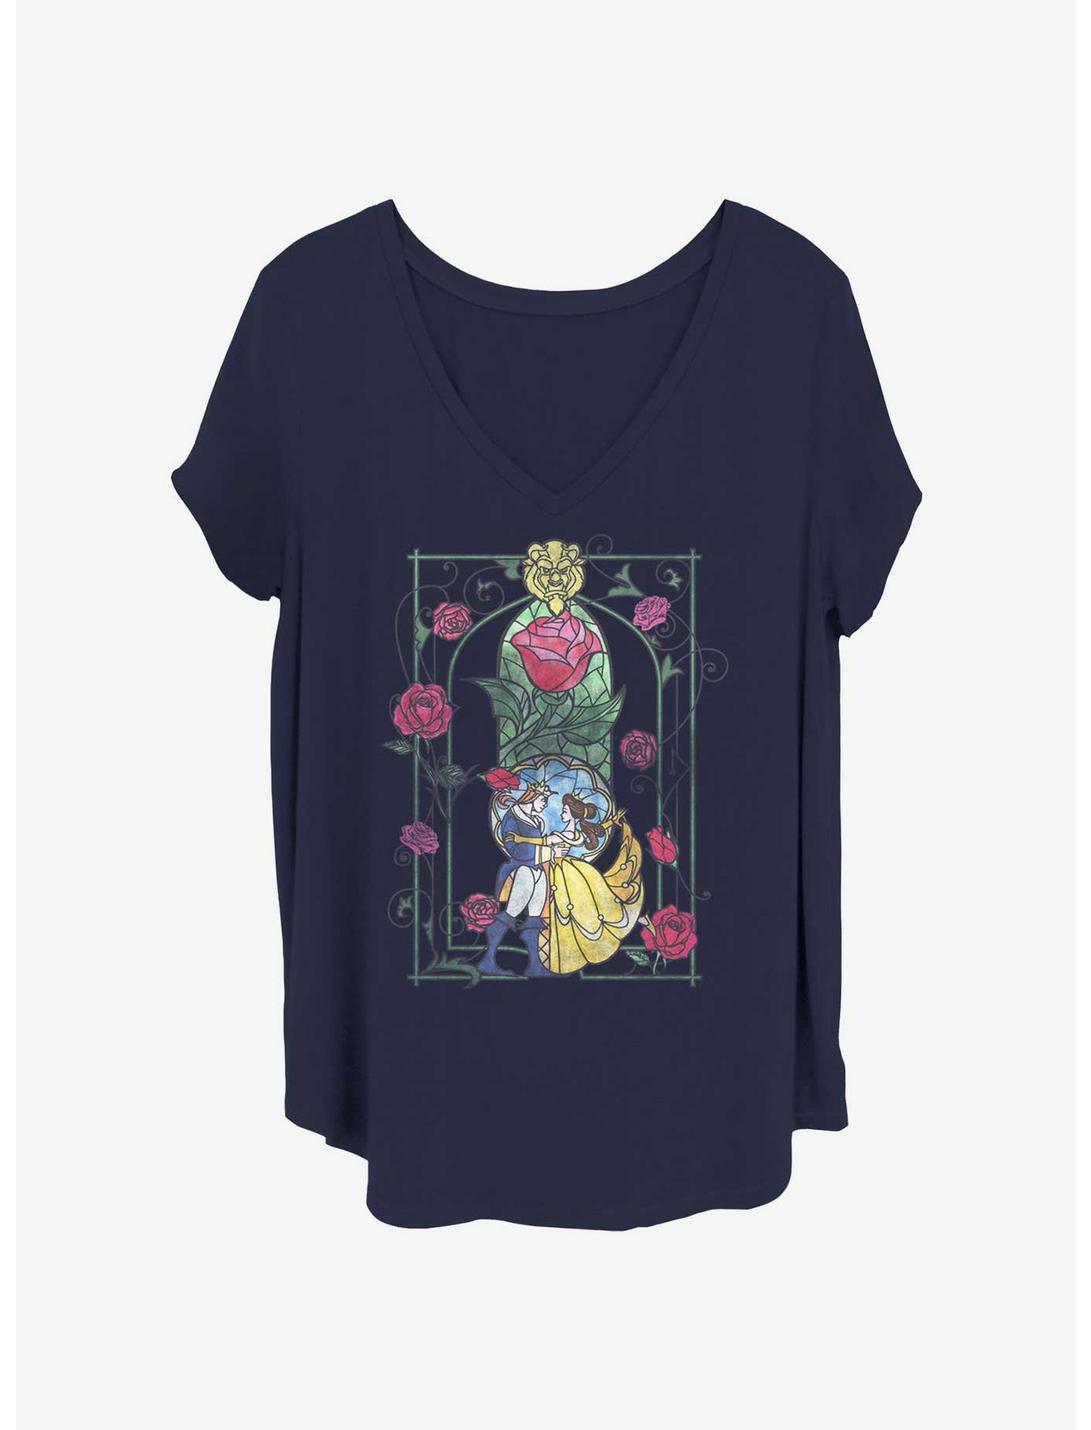 Disney Beauty and the Beast Beauty Dance Girls T-Shirt Plus Size, NAVY, hi-res